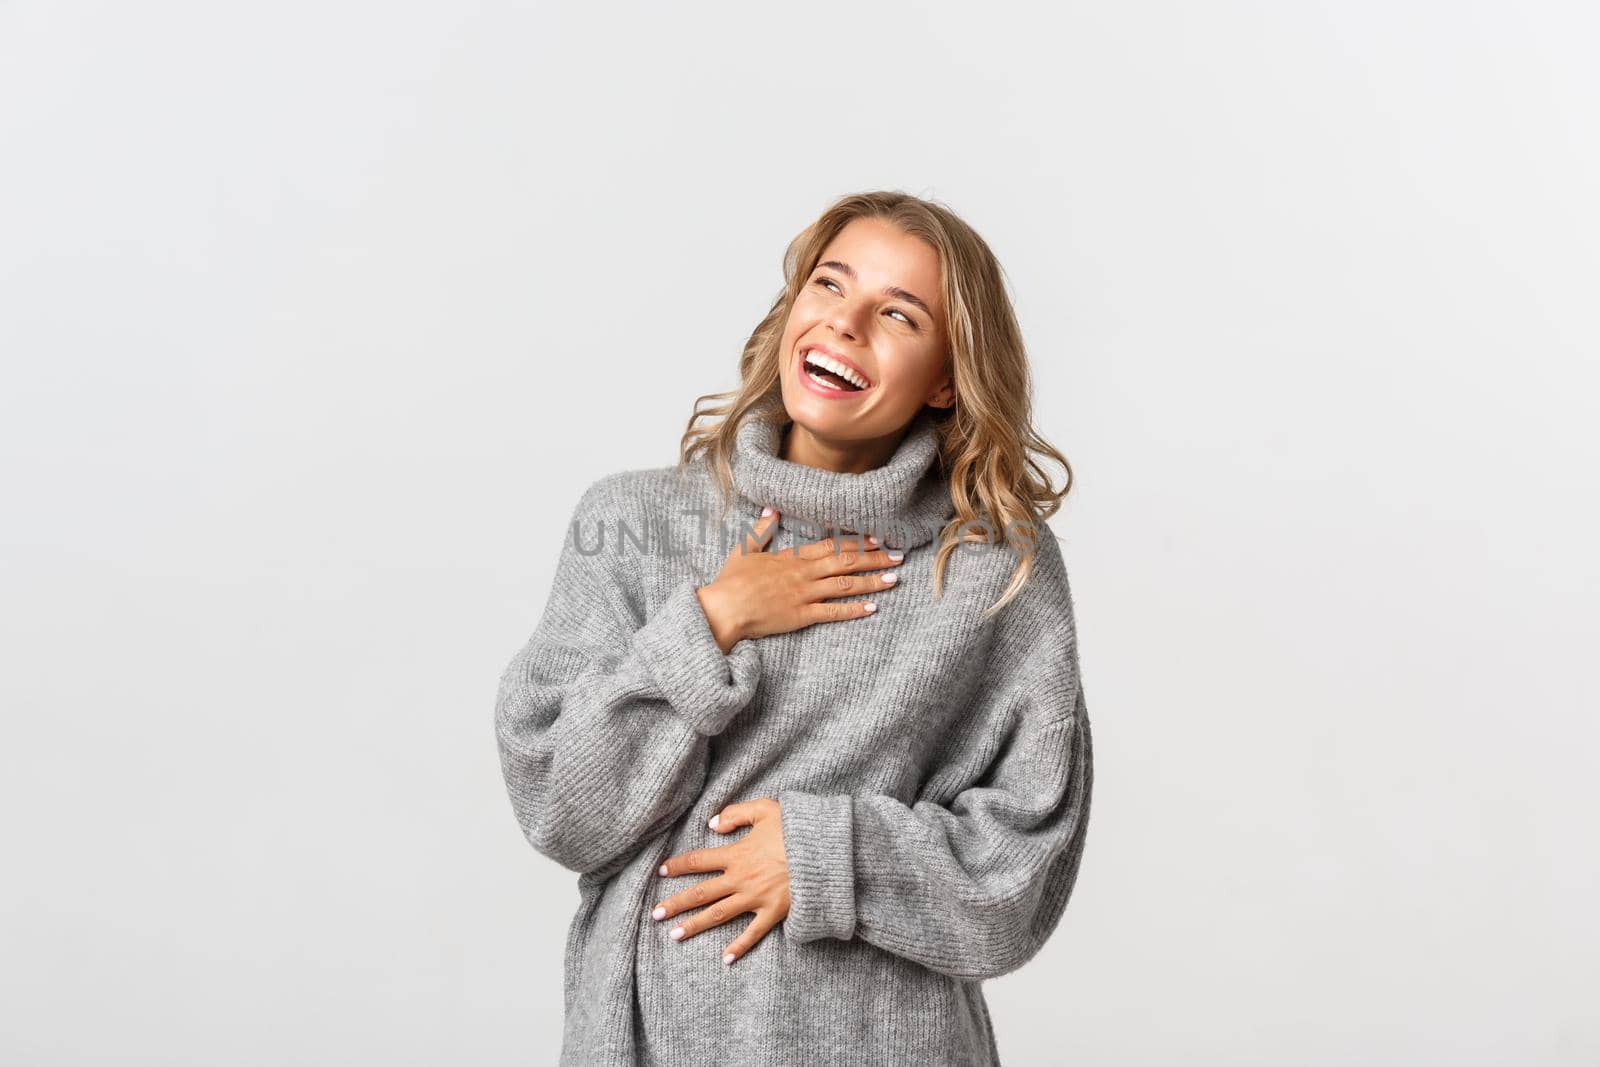 Close-up of happy beautiful woman with short blond hairstyle, laughing and looking at upper left corner, standing in grey sweater, white background.